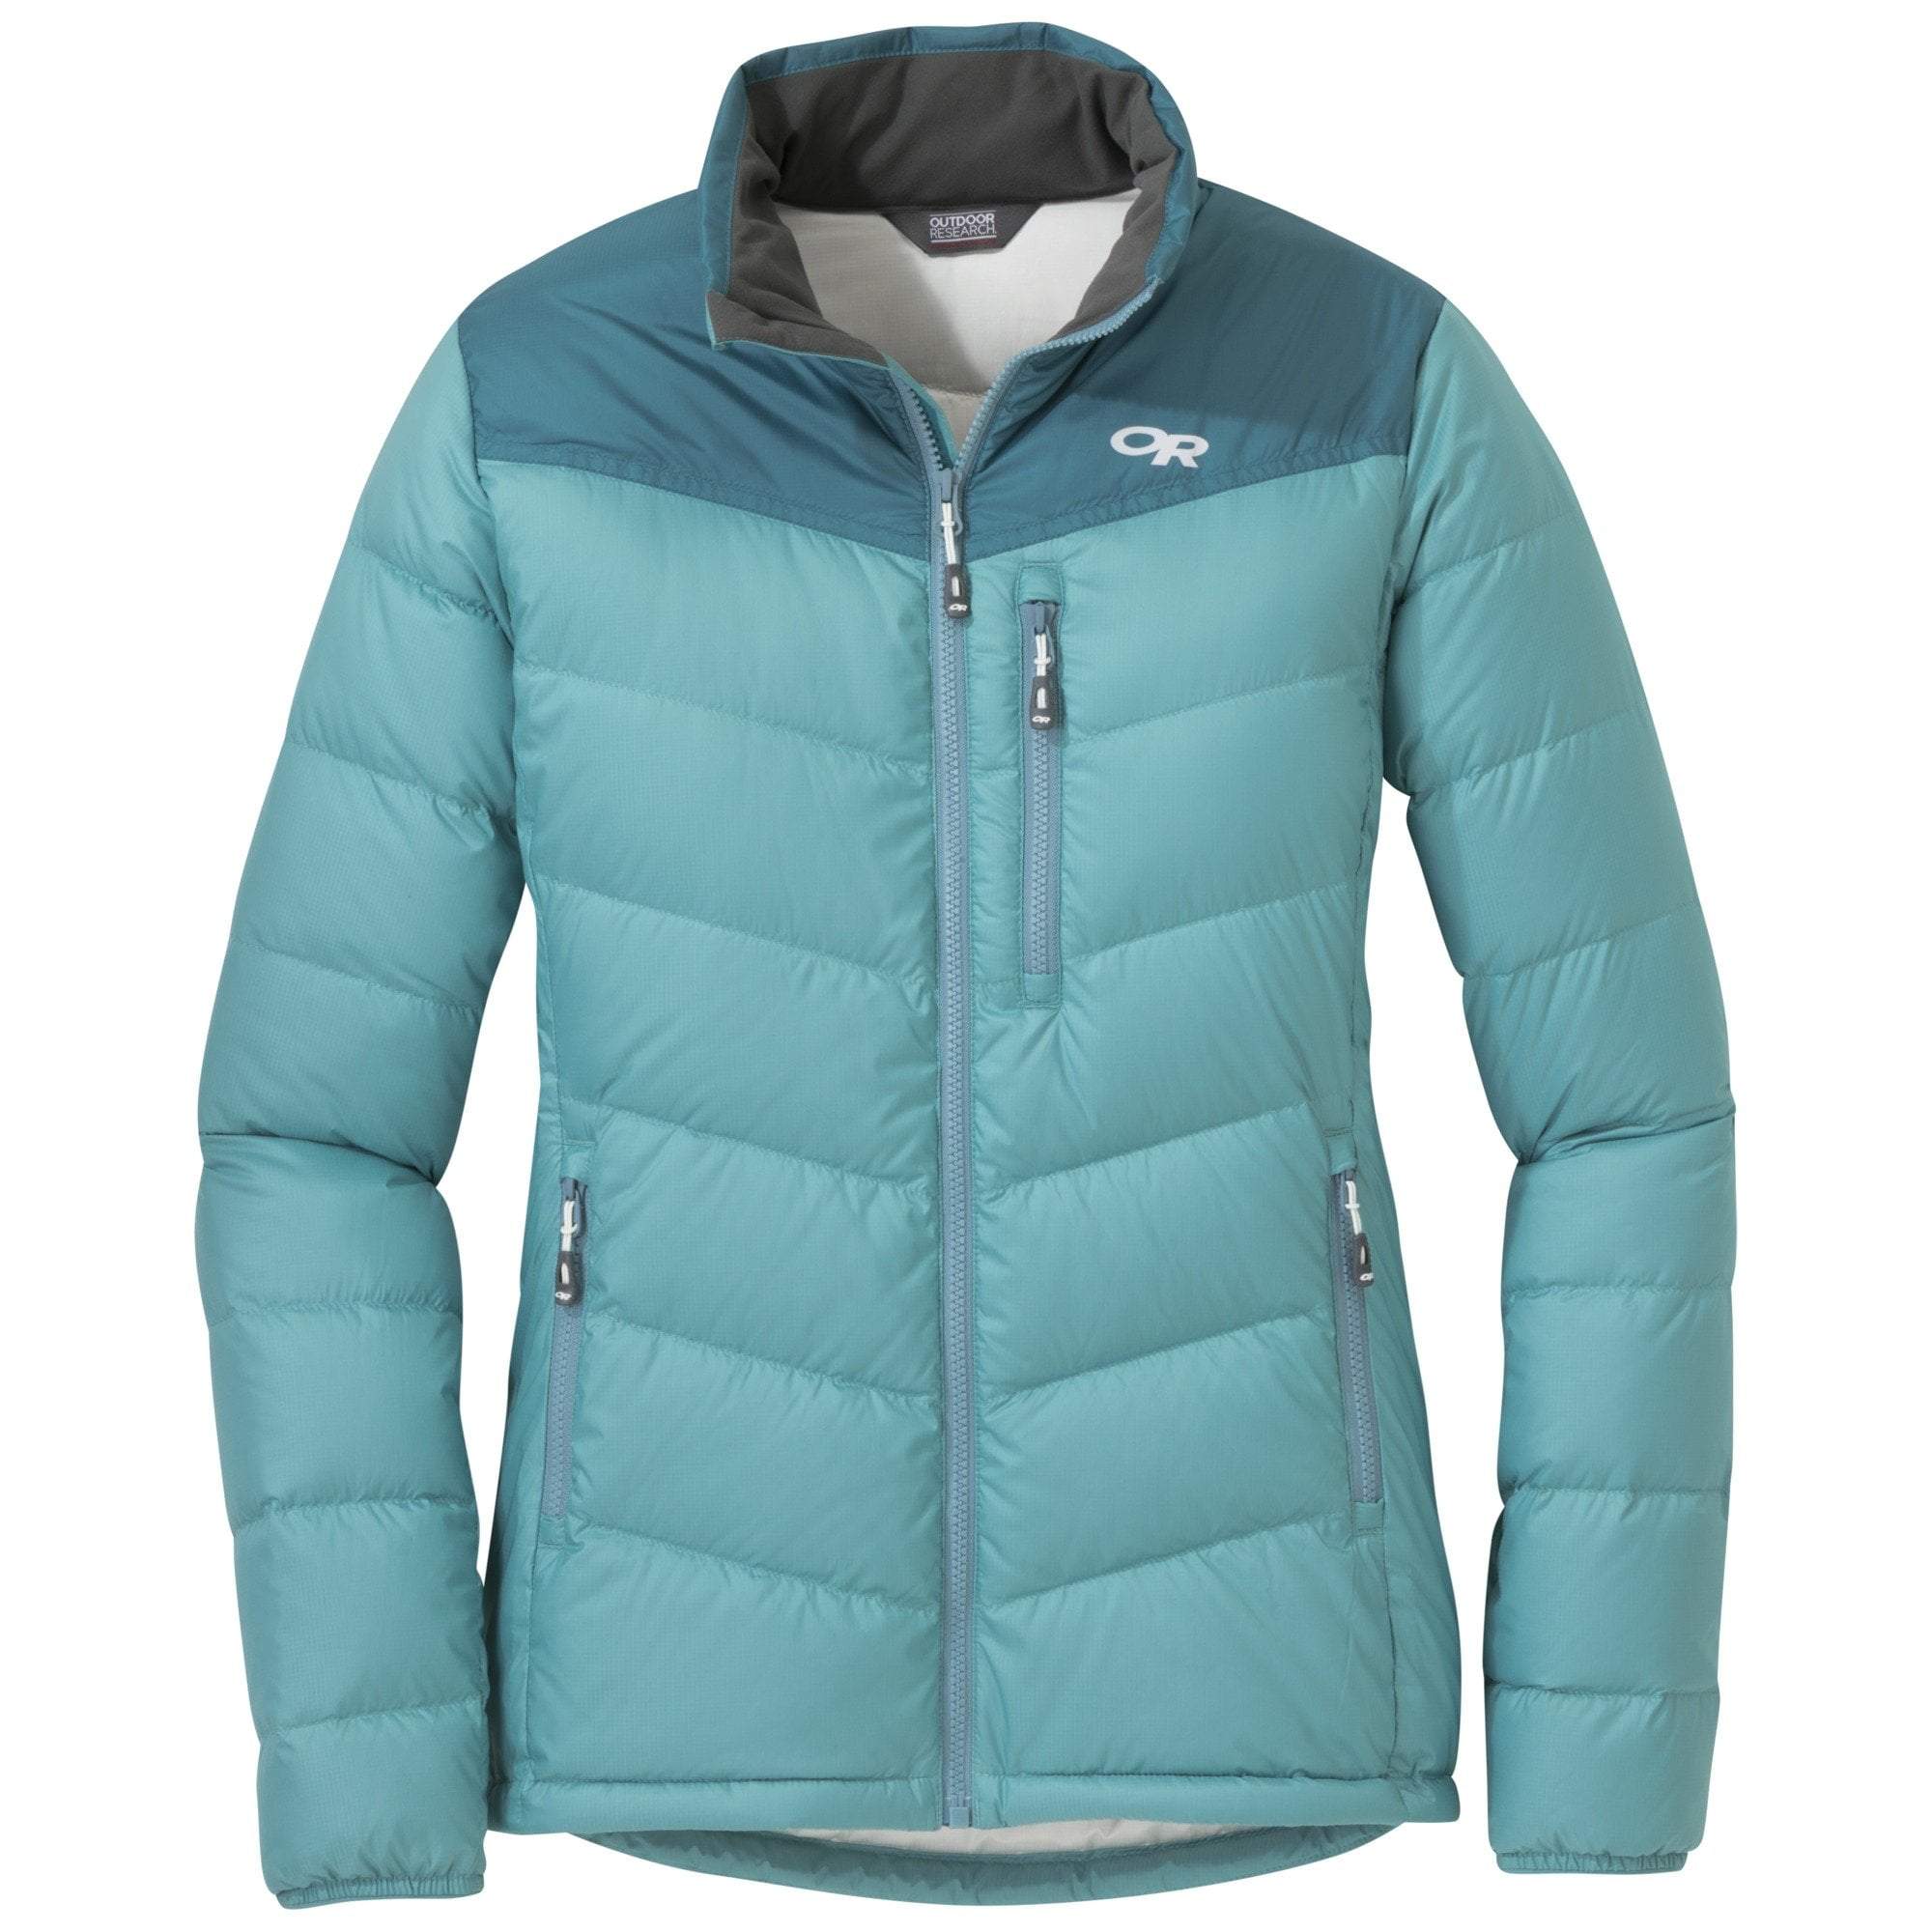 Outdoor Research Outdoor Research Women's Transcendent Down Jacket 2018 X-Small / Seaglass Teal clothing